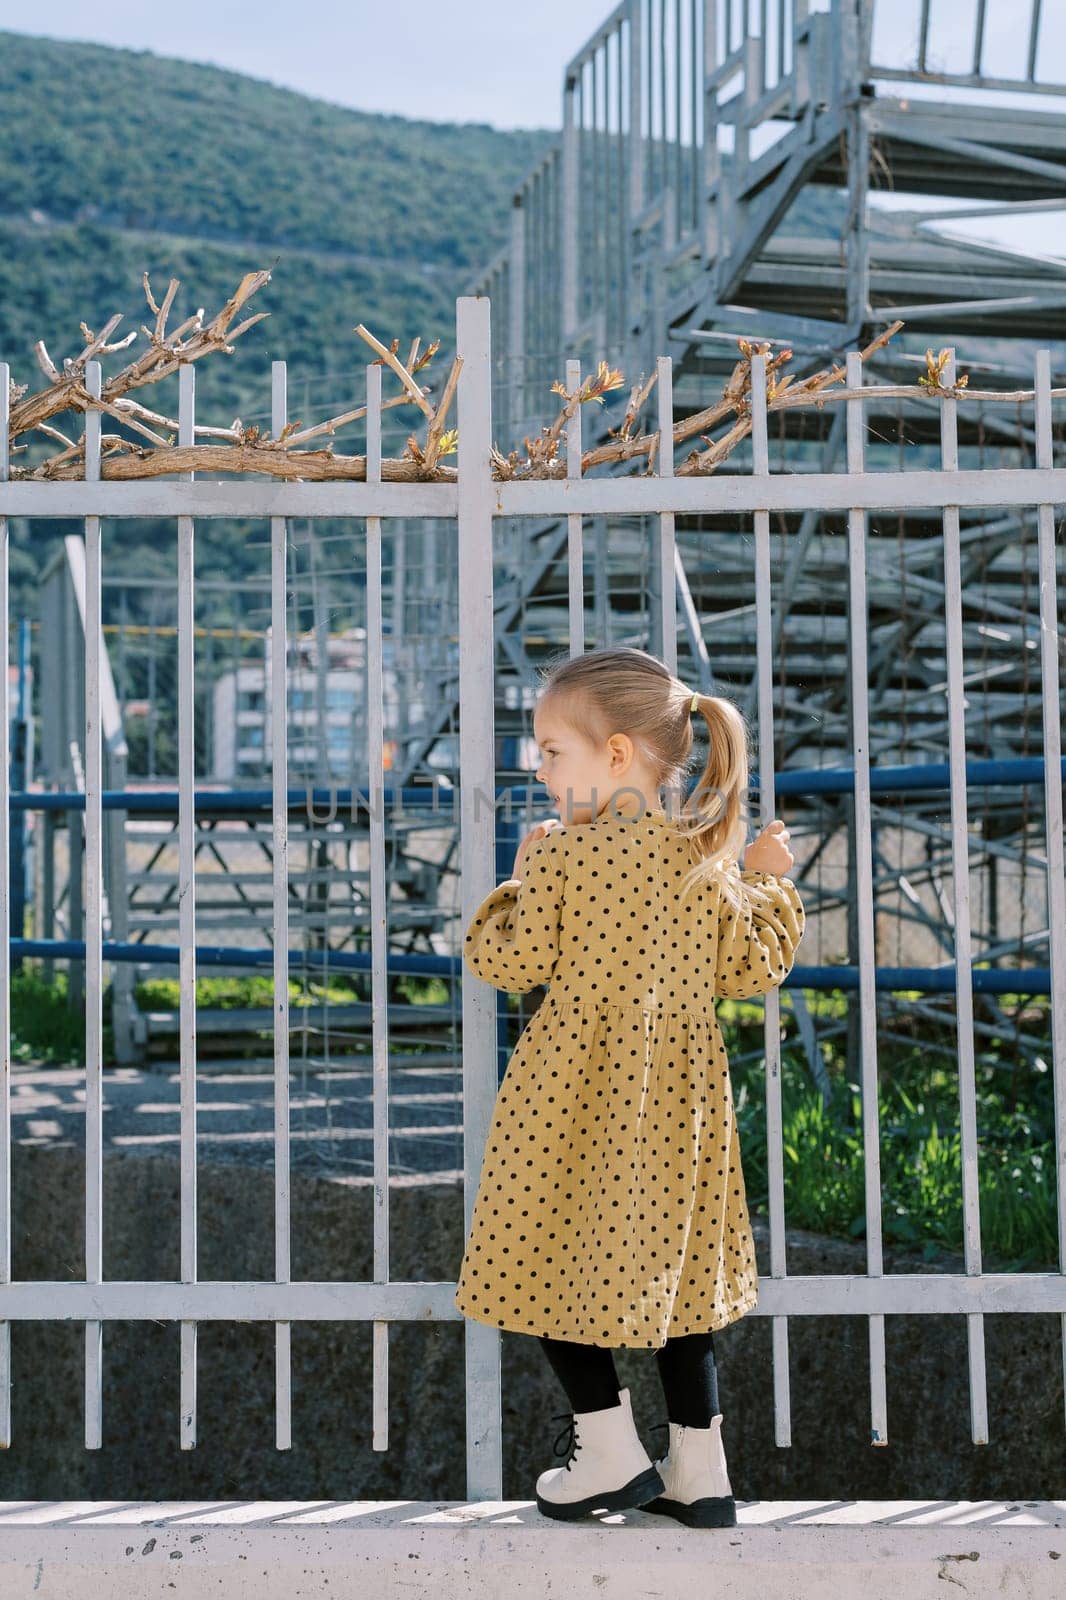 Little girl stands on the base of a metal fence, holding onto the bars and looking to the side. Back view. High quality photo